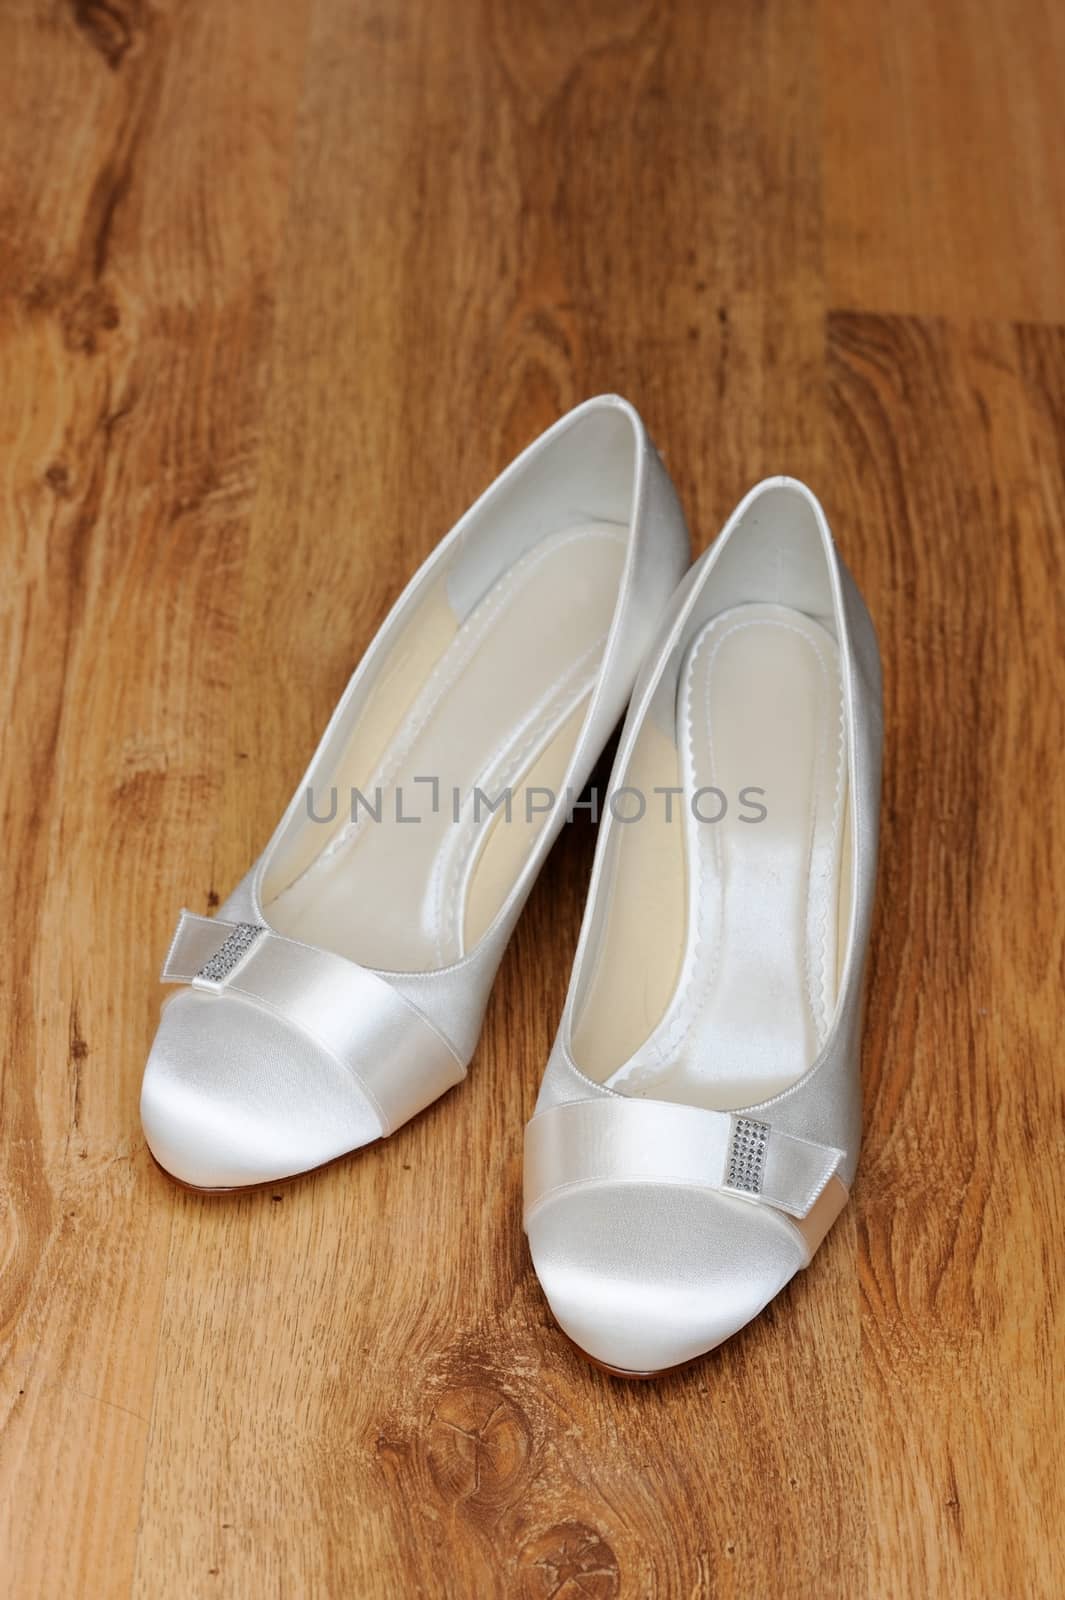 Brides Shoes by kmwphotography